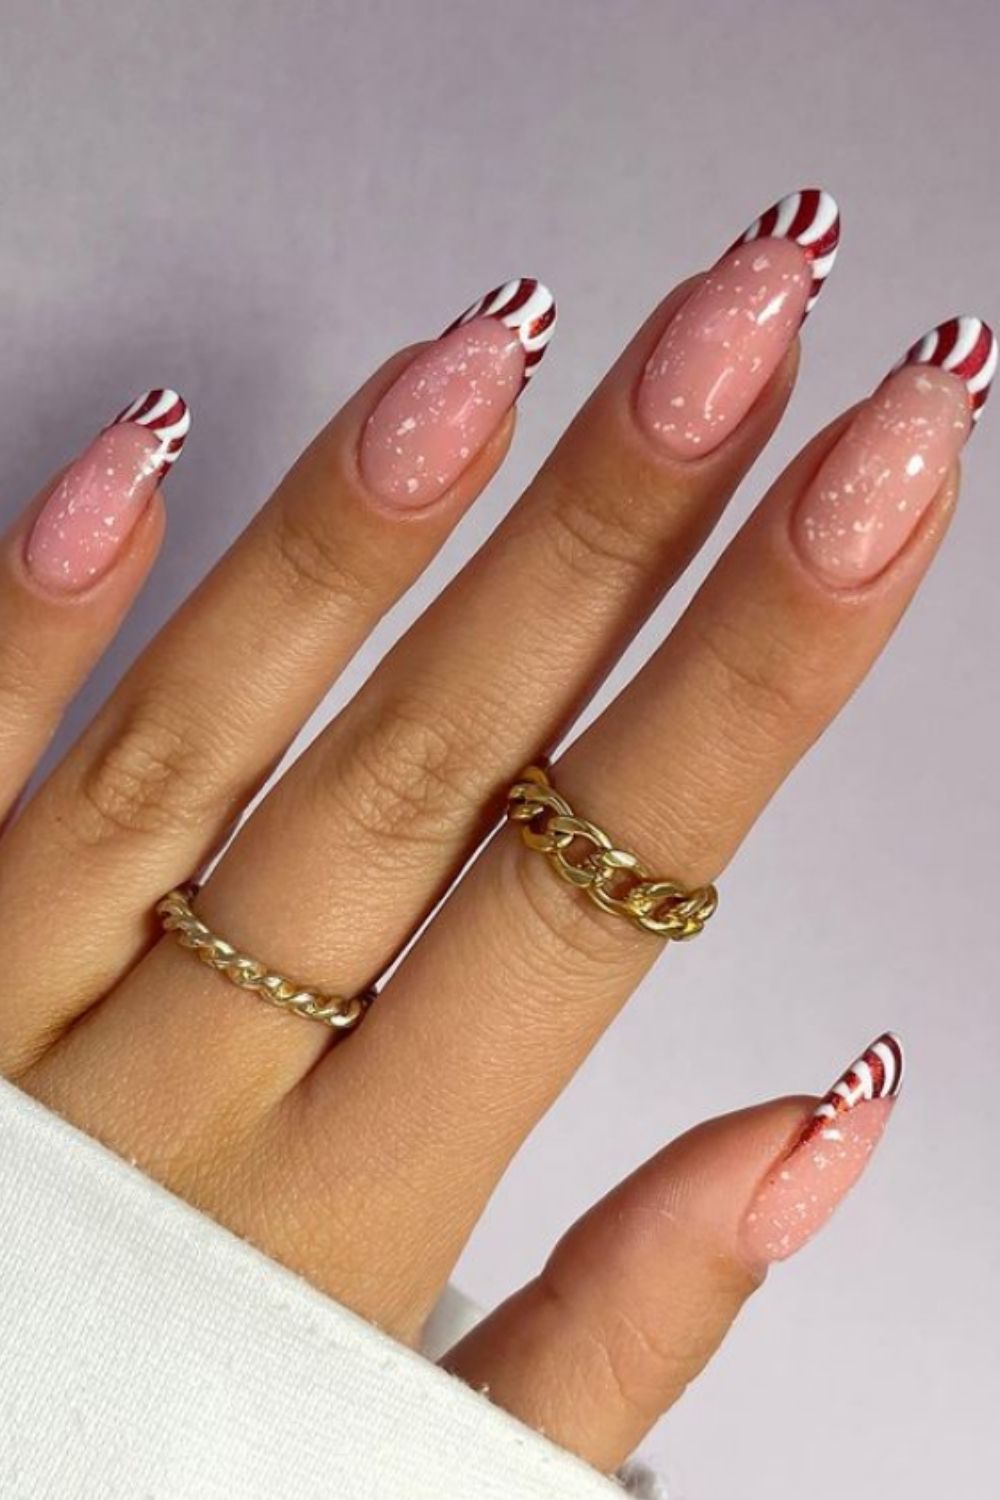 Candy canes tip French nails designs